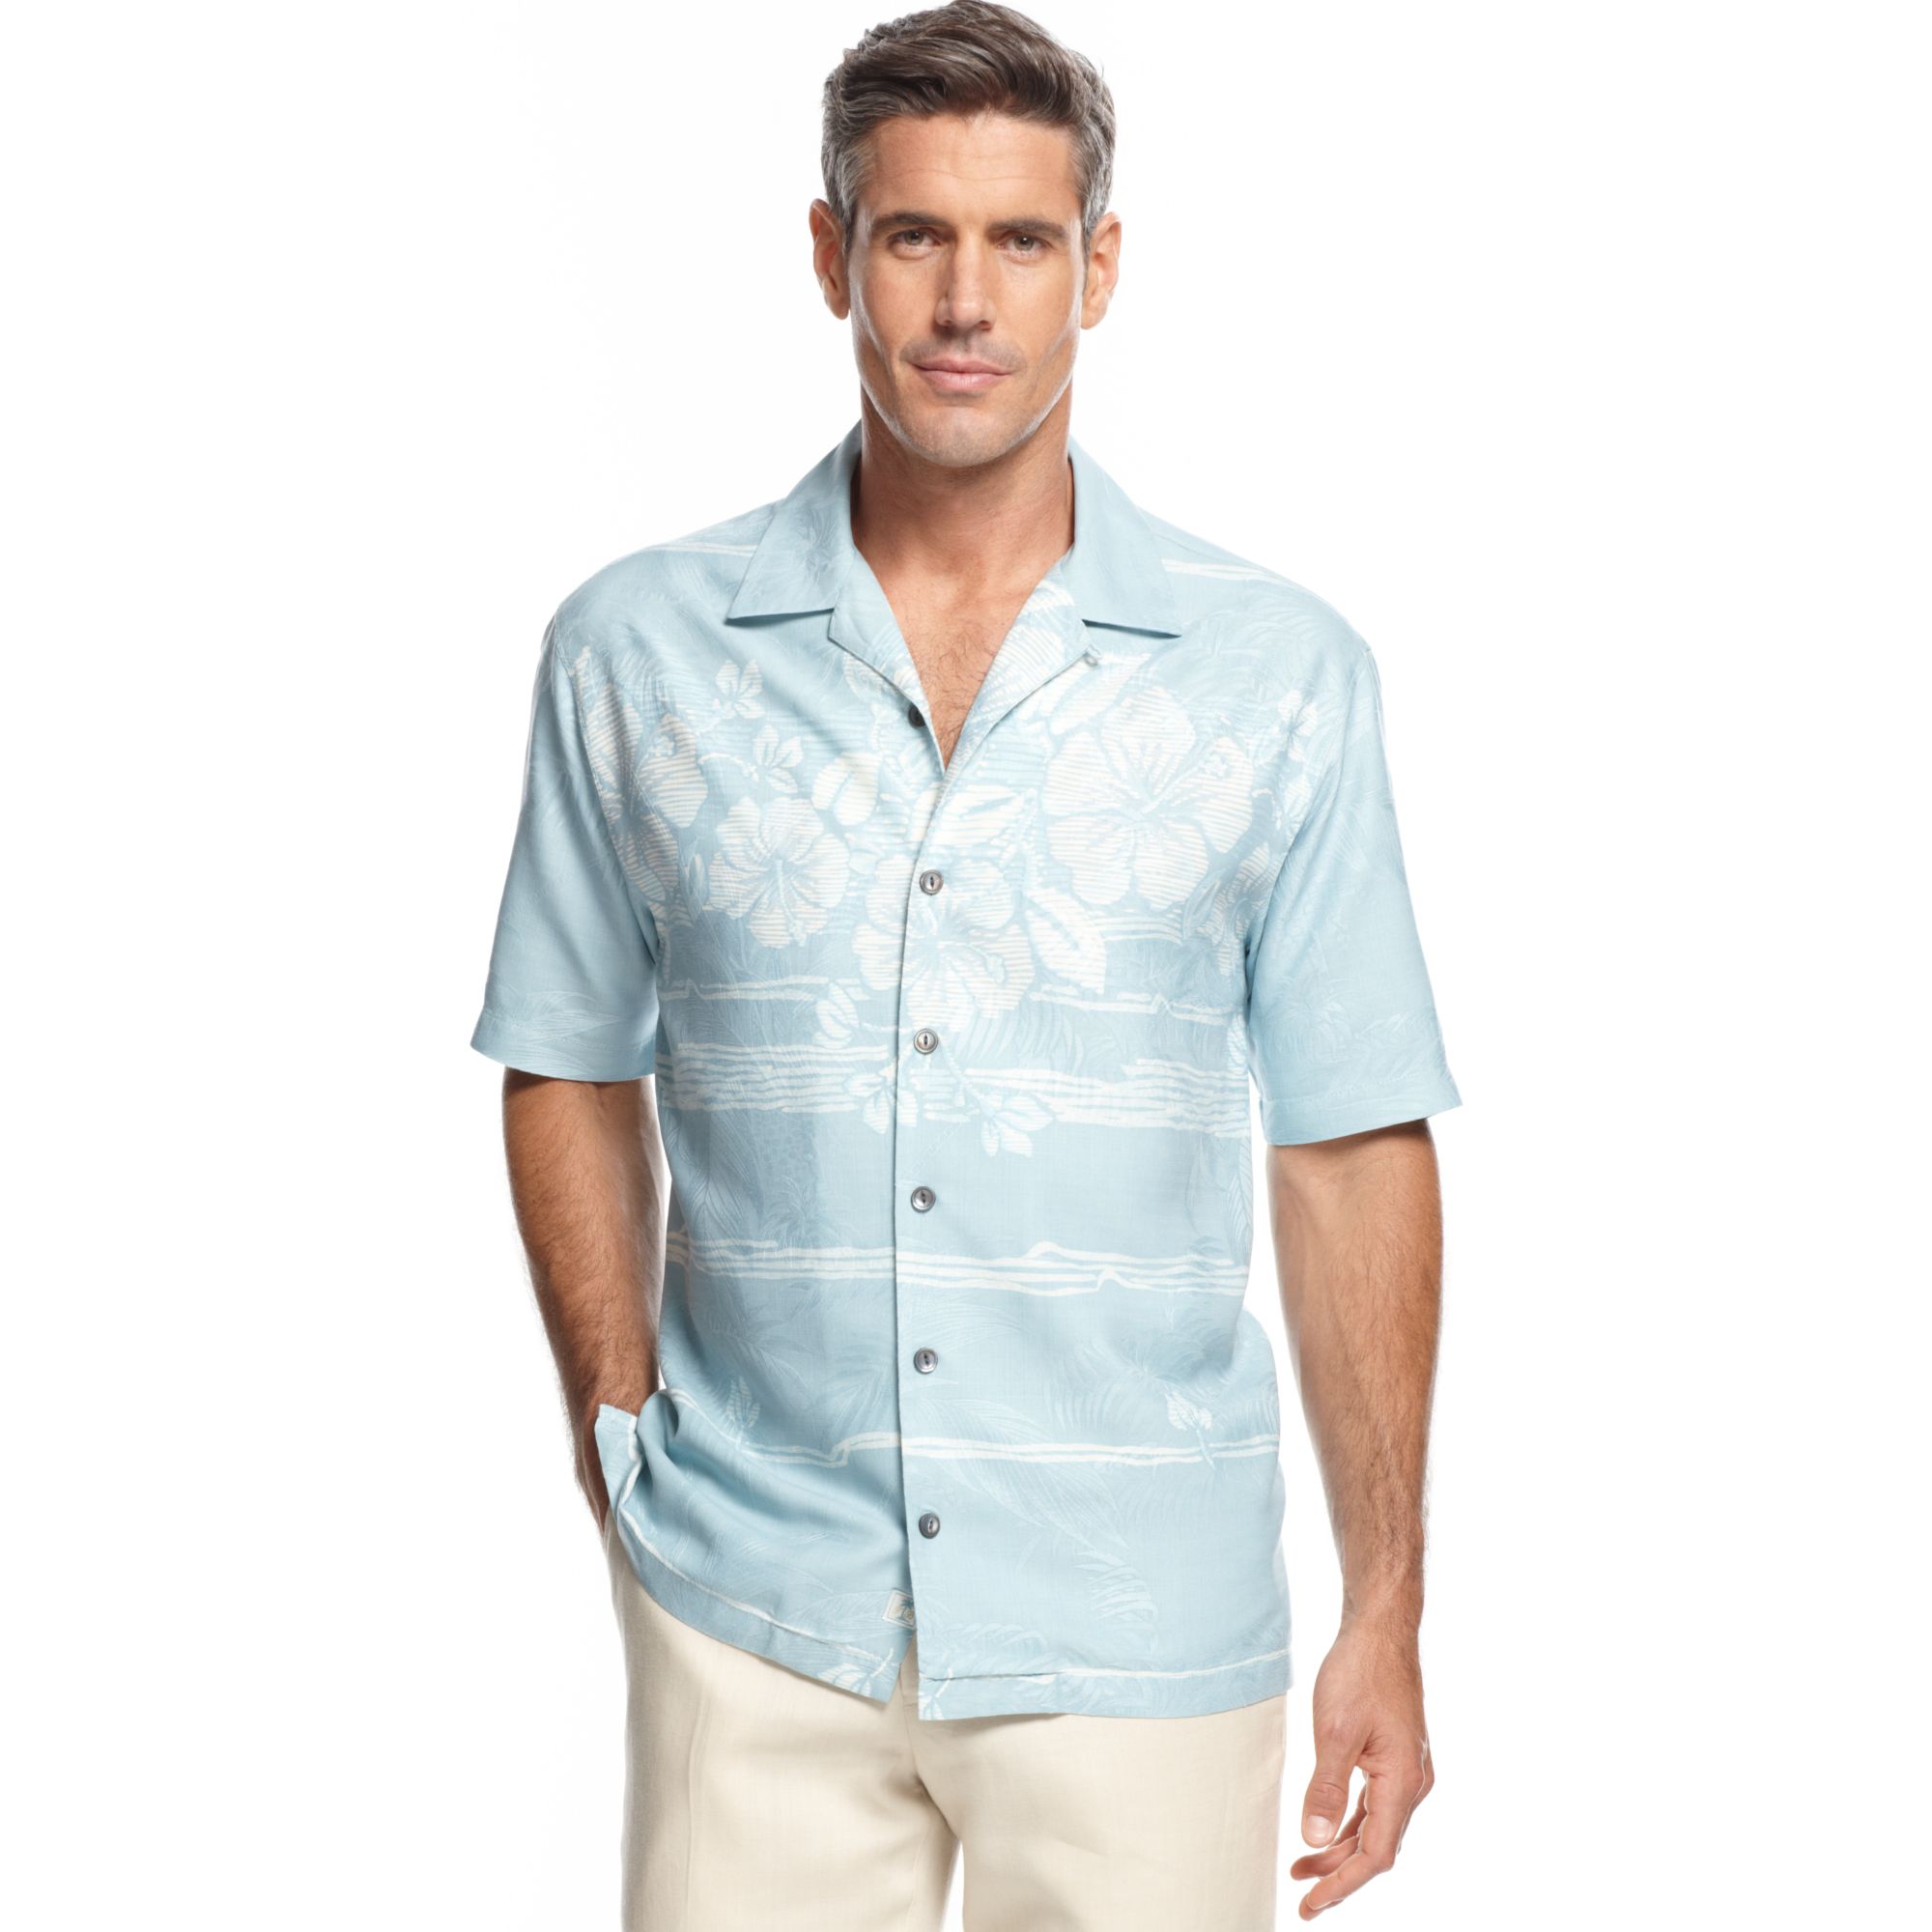 Lyst - Tommy Bahama Short Sleeve Hibiscus Fade Away Shirt in Blue for Men